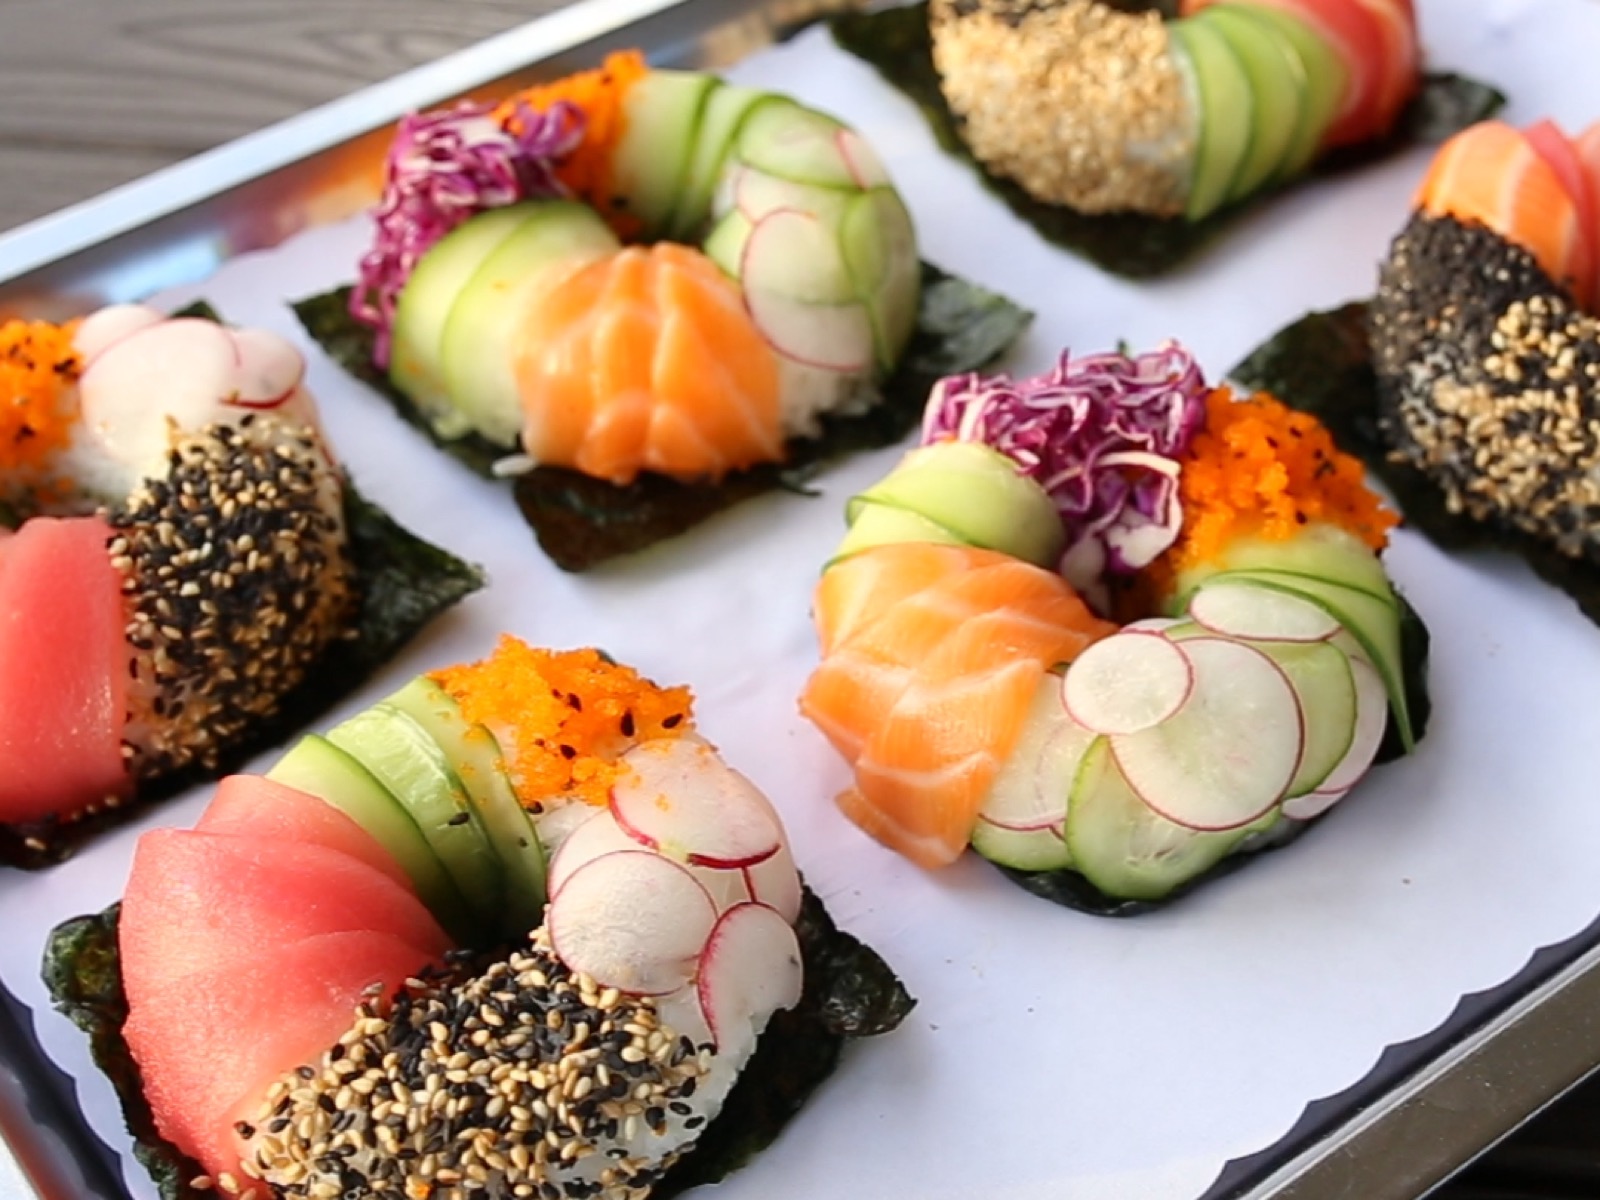 Say “Yum” Or “Yuck” to These Trendy Foods to Find Out What People Hate Most About You Sushi donuts doughnuts